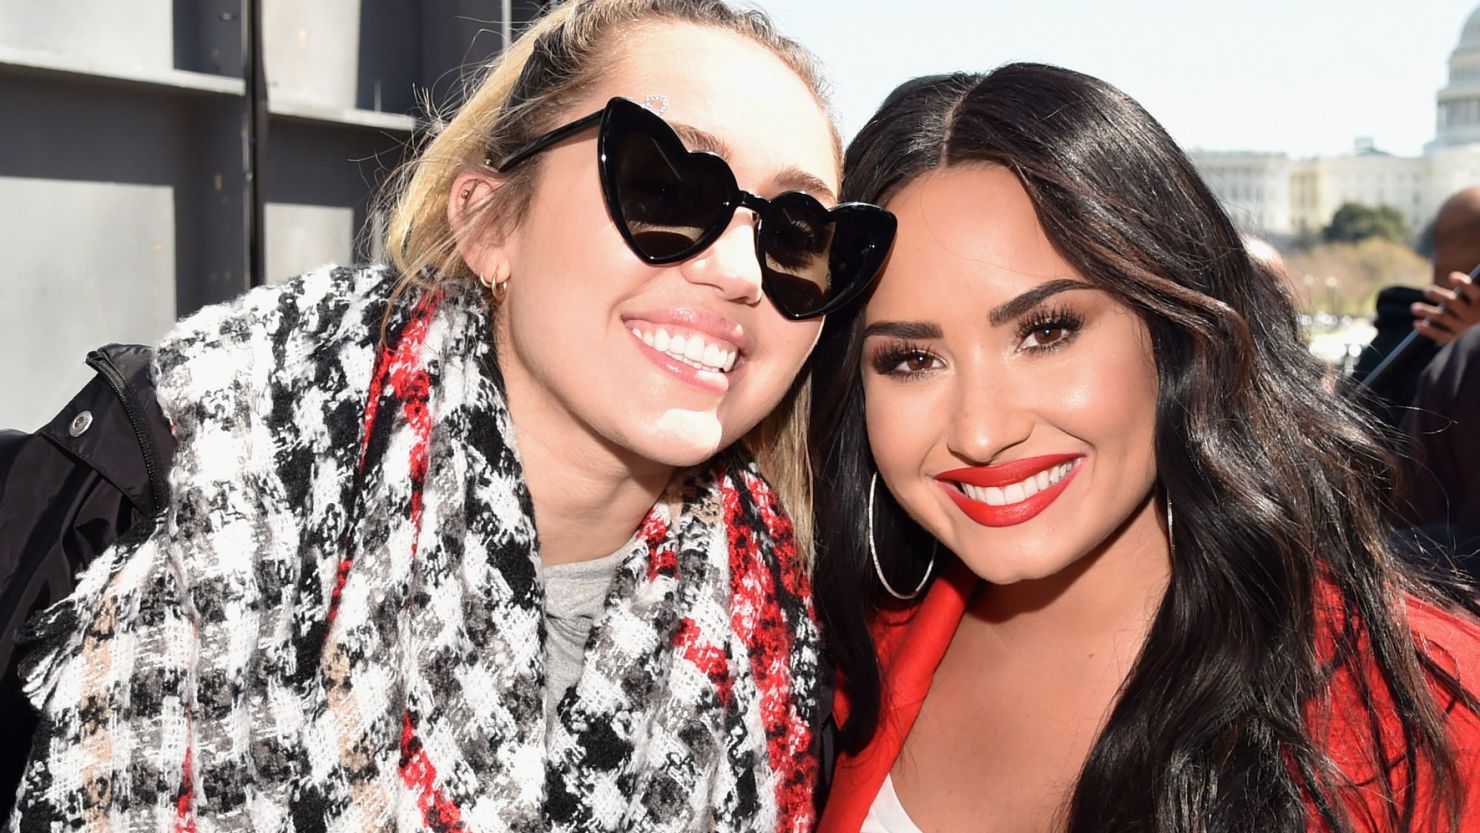 Miley Cyrus and Demi Lovato attend the March For Our Lives in Washington in 2018.